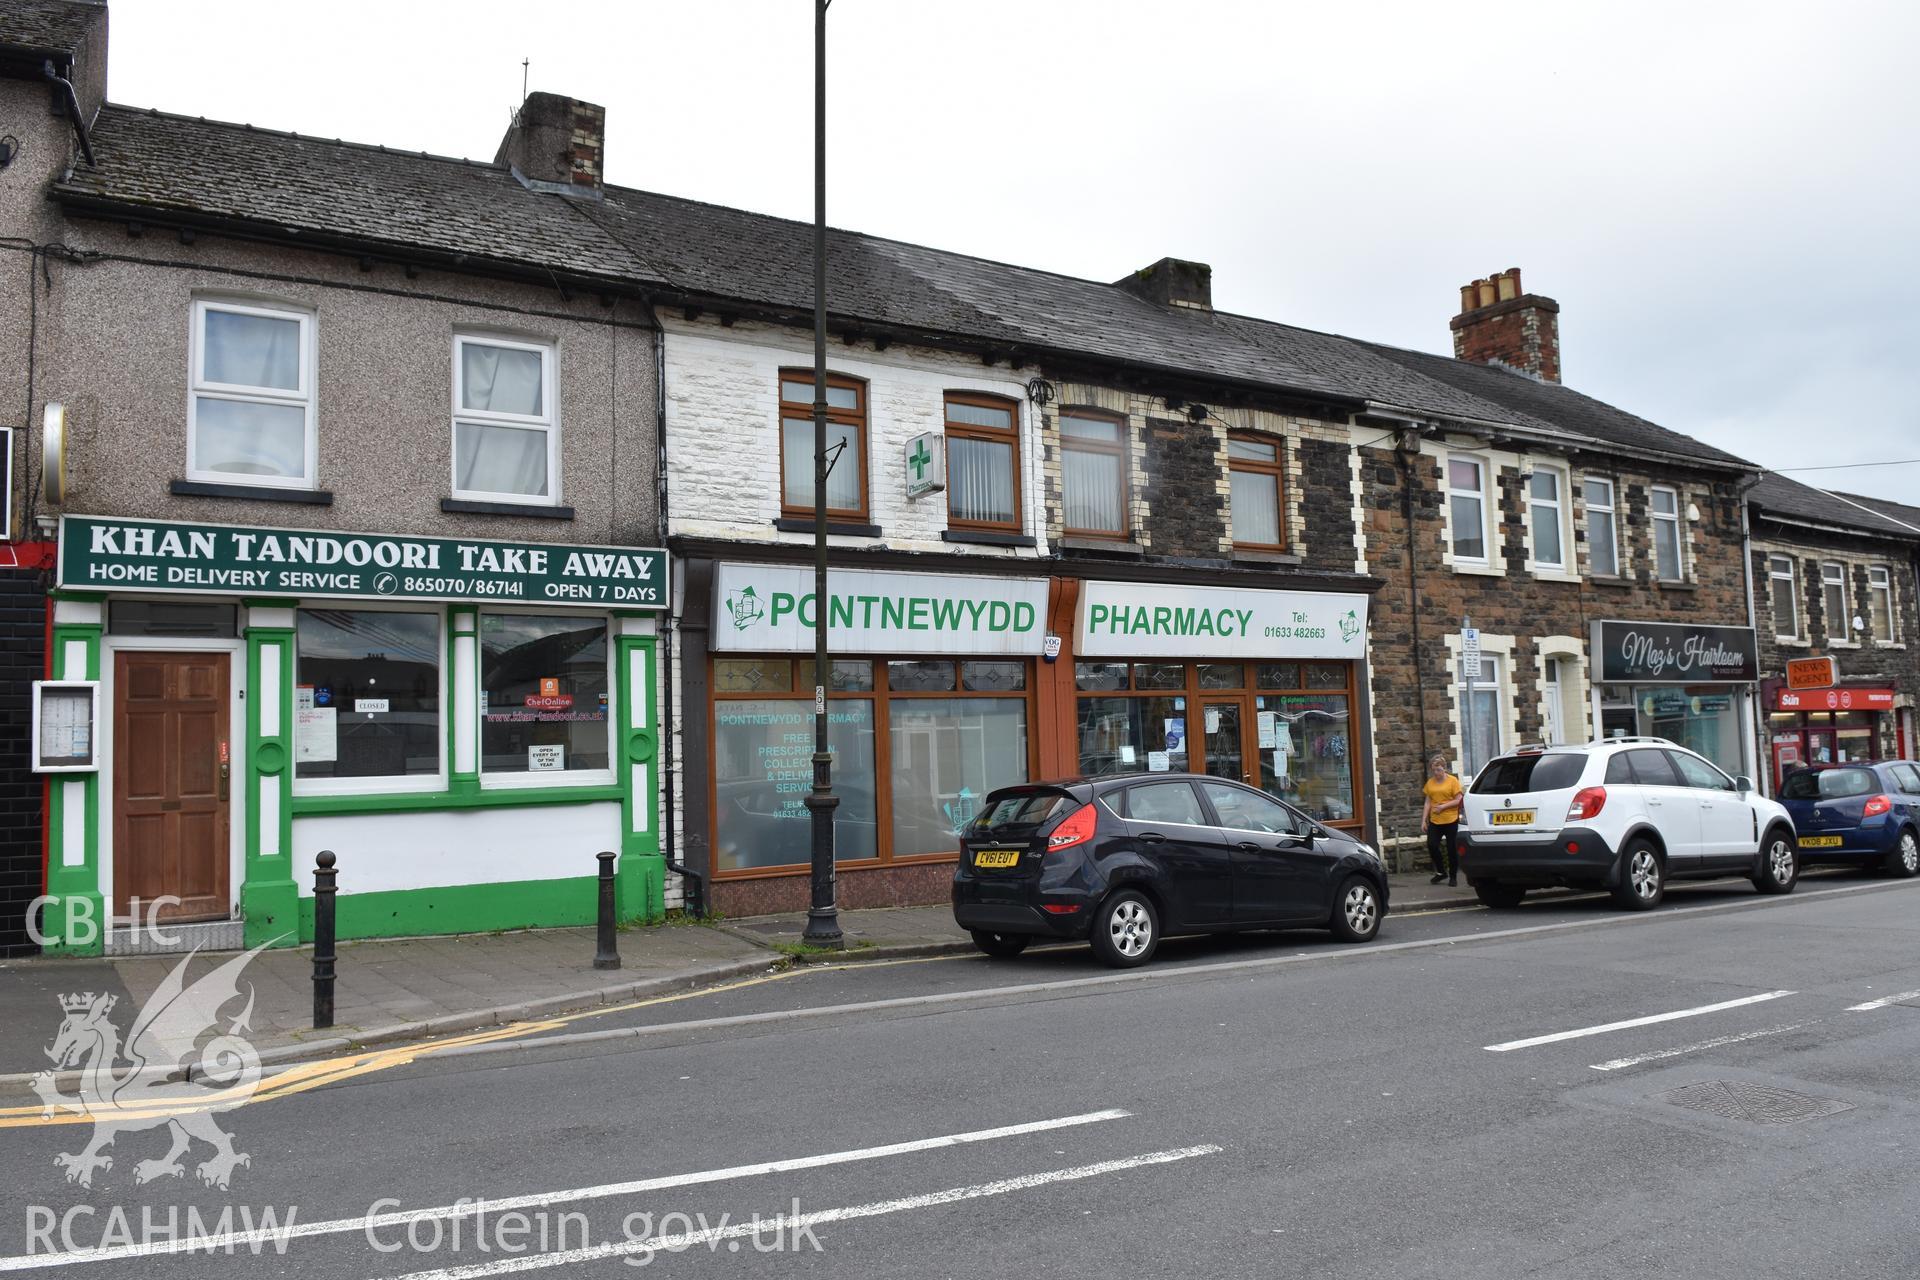 Front elevation of shops on a street in the Pontnewydd area of Cwmbran. Photographed by Susan Fielding of RCAHMW on 25 May 2021.